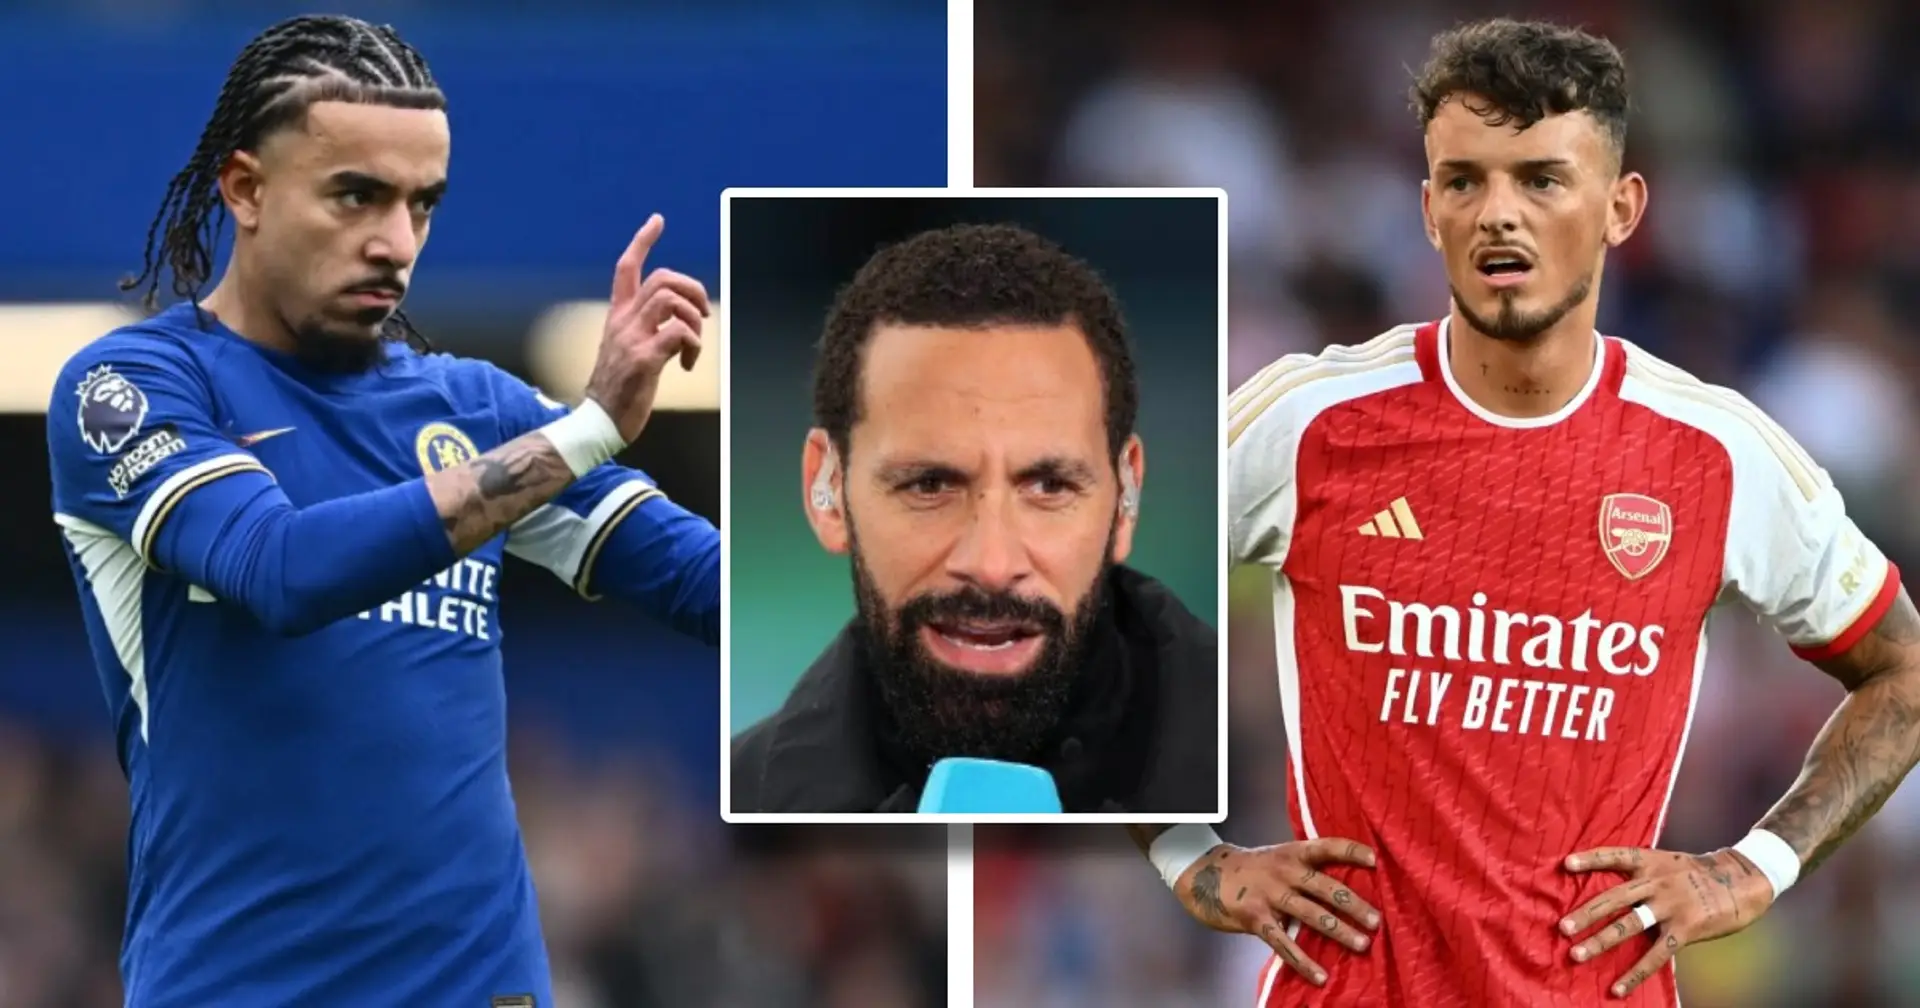 Rio Ferdinand names Malo Gusto ahead of Ben White in his Premier League Team of the Year